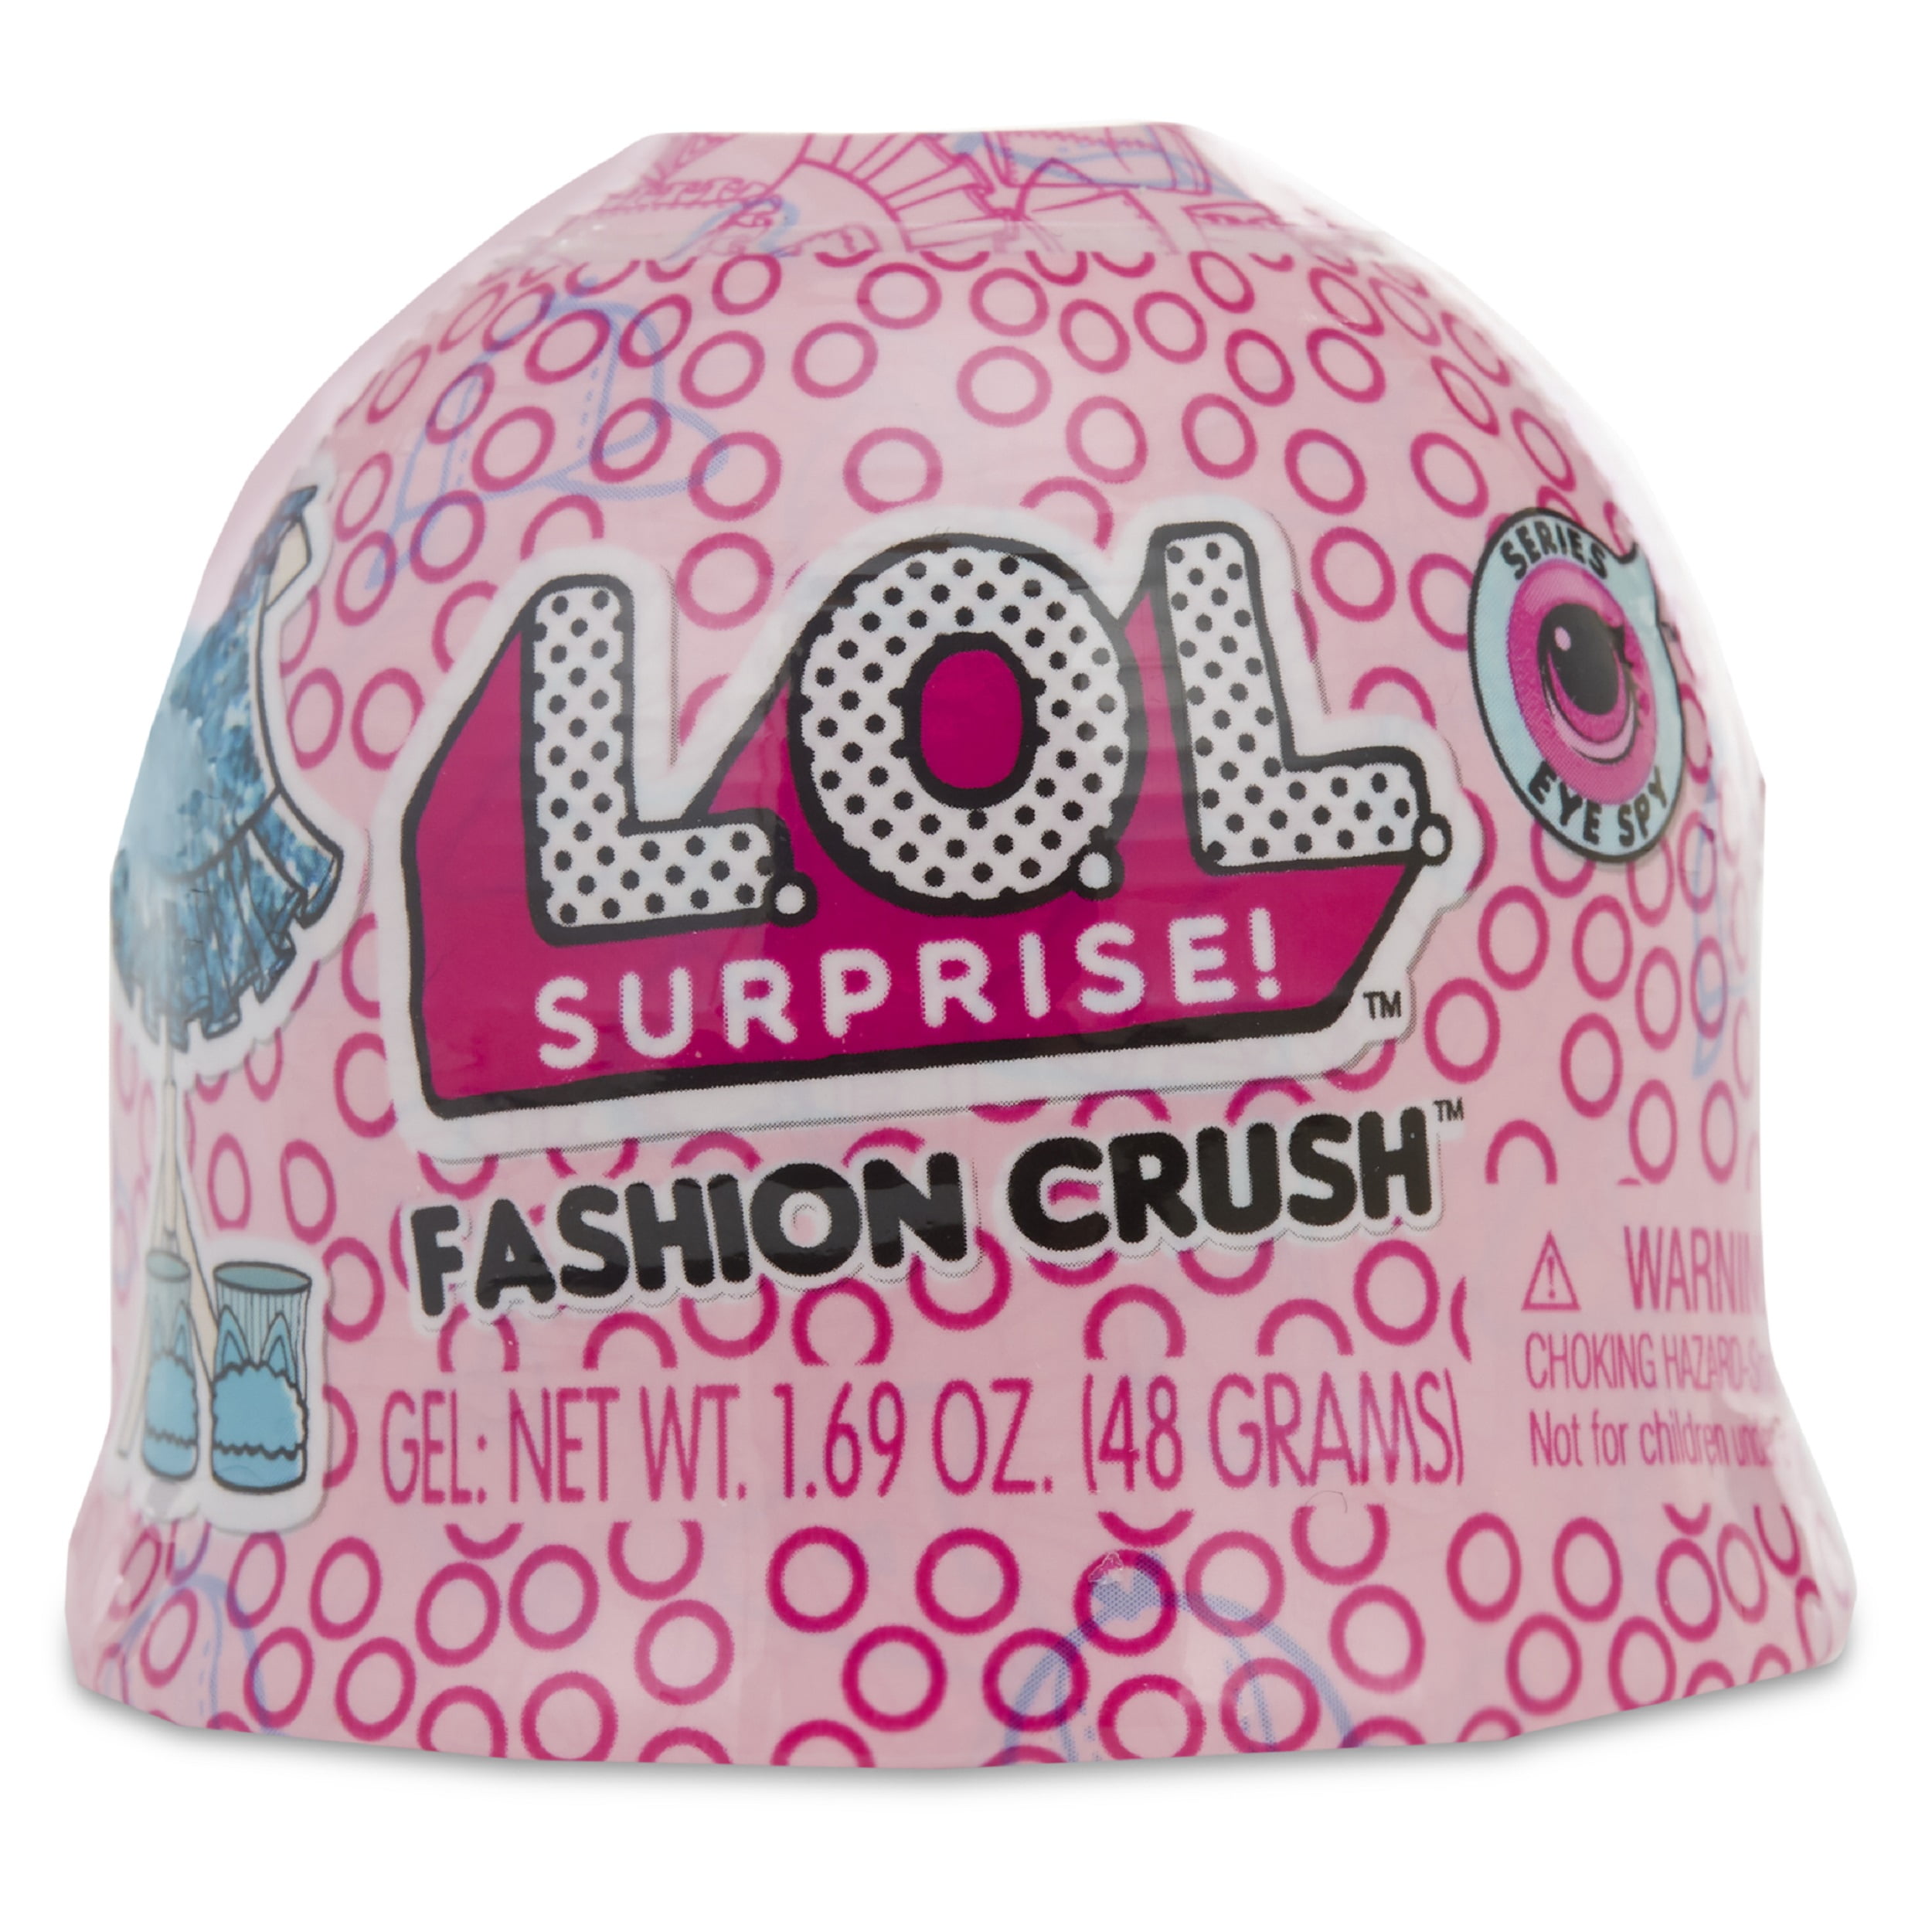 L.o.l Surprise Fashion Crush 6-pack LOL Series 4 Eye Spy Mystery MGA CHOP for sale online